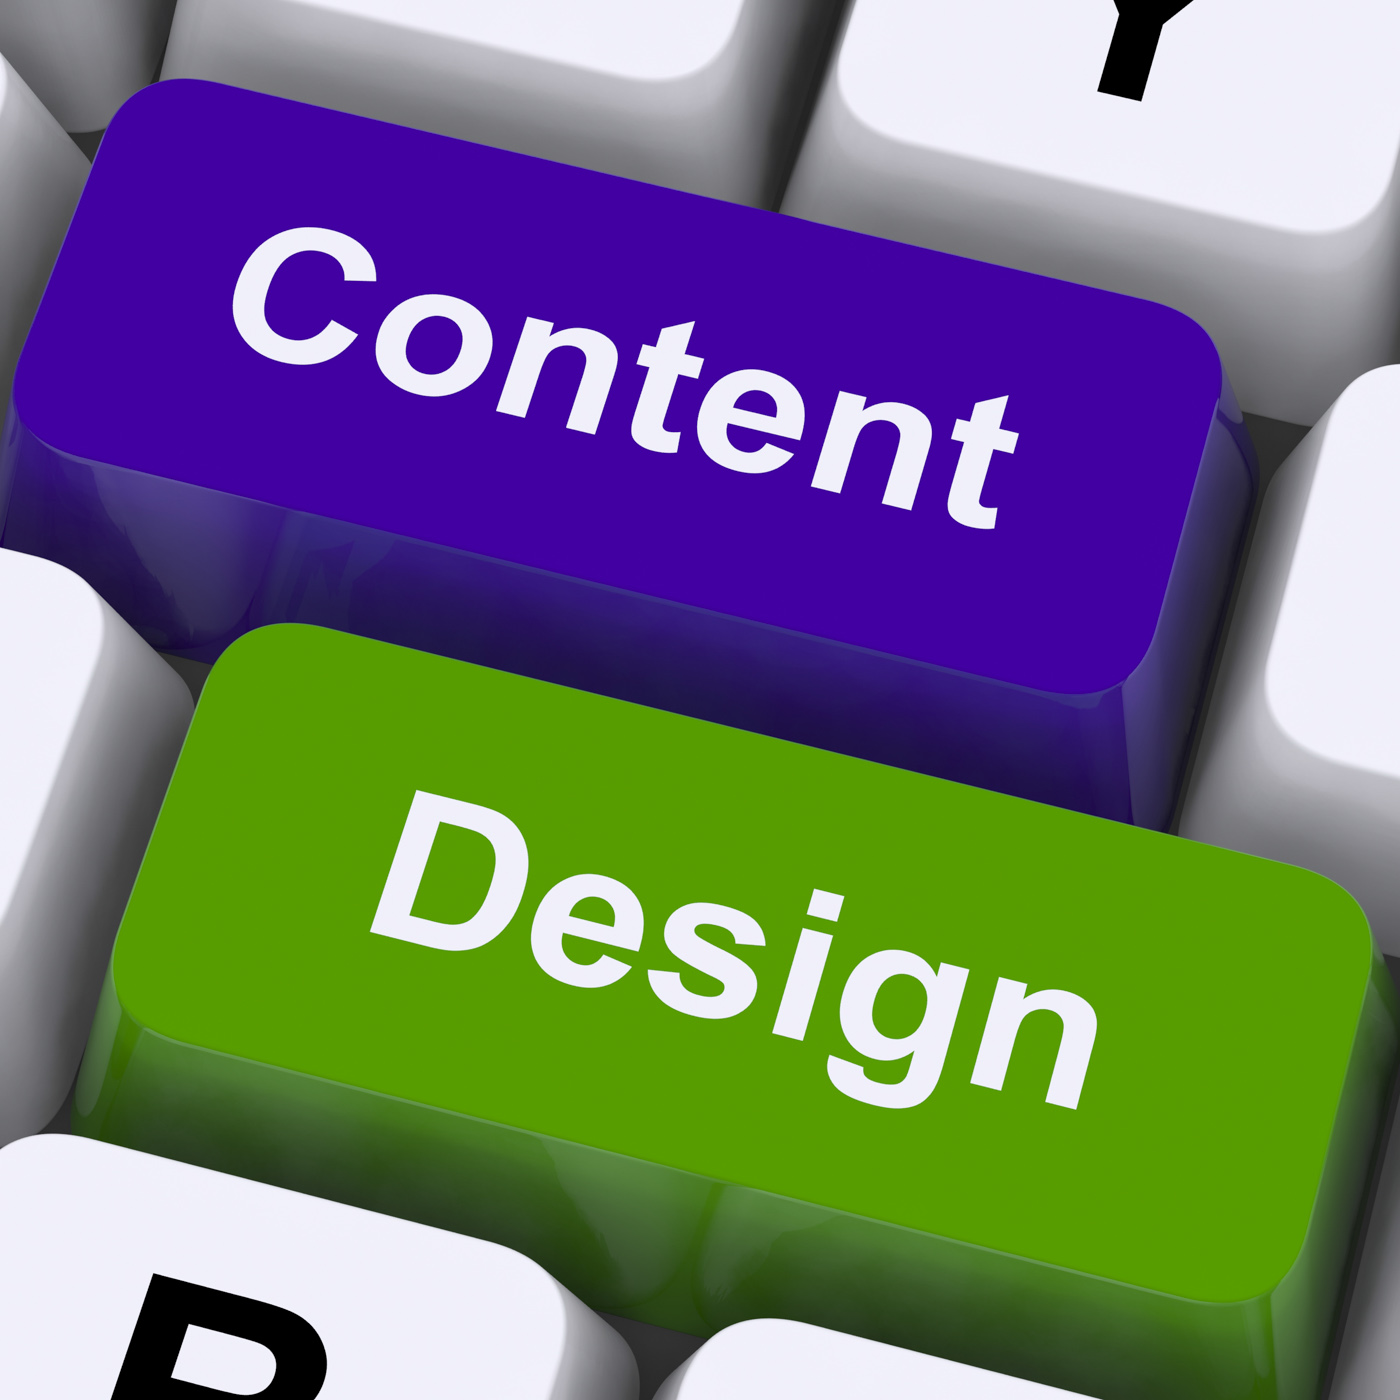 Content and design keys show creative promotion photo